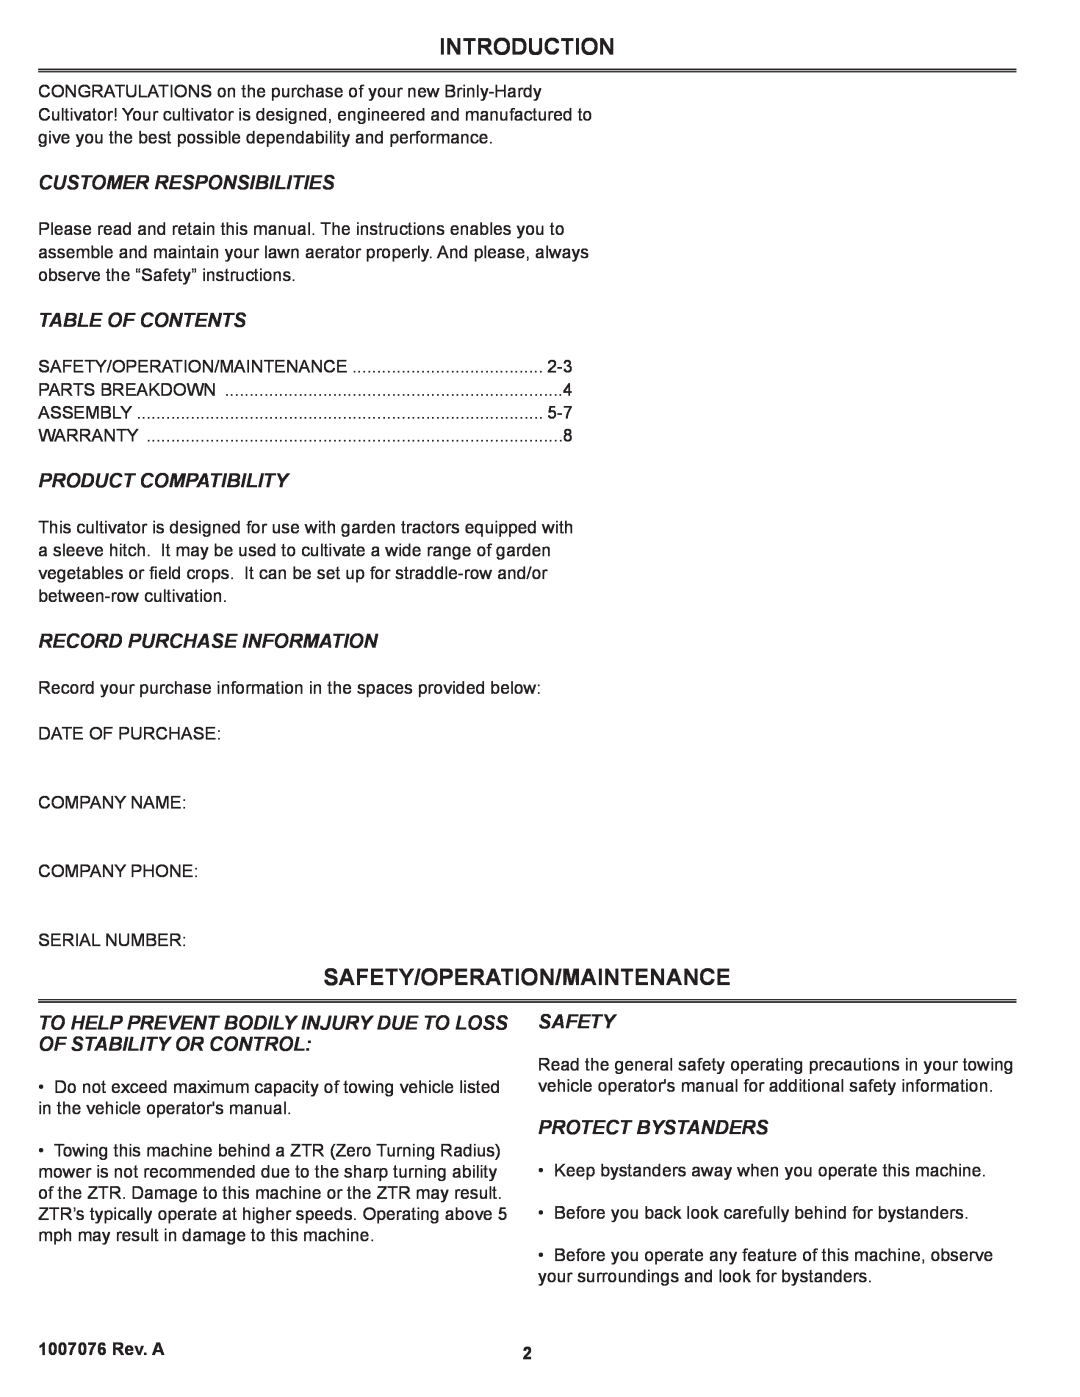 Sears CC-560 Introduction, Safety/Operation/Maintenance, Customer Responsibilities, Table Of Contents, Protect Bystanders 